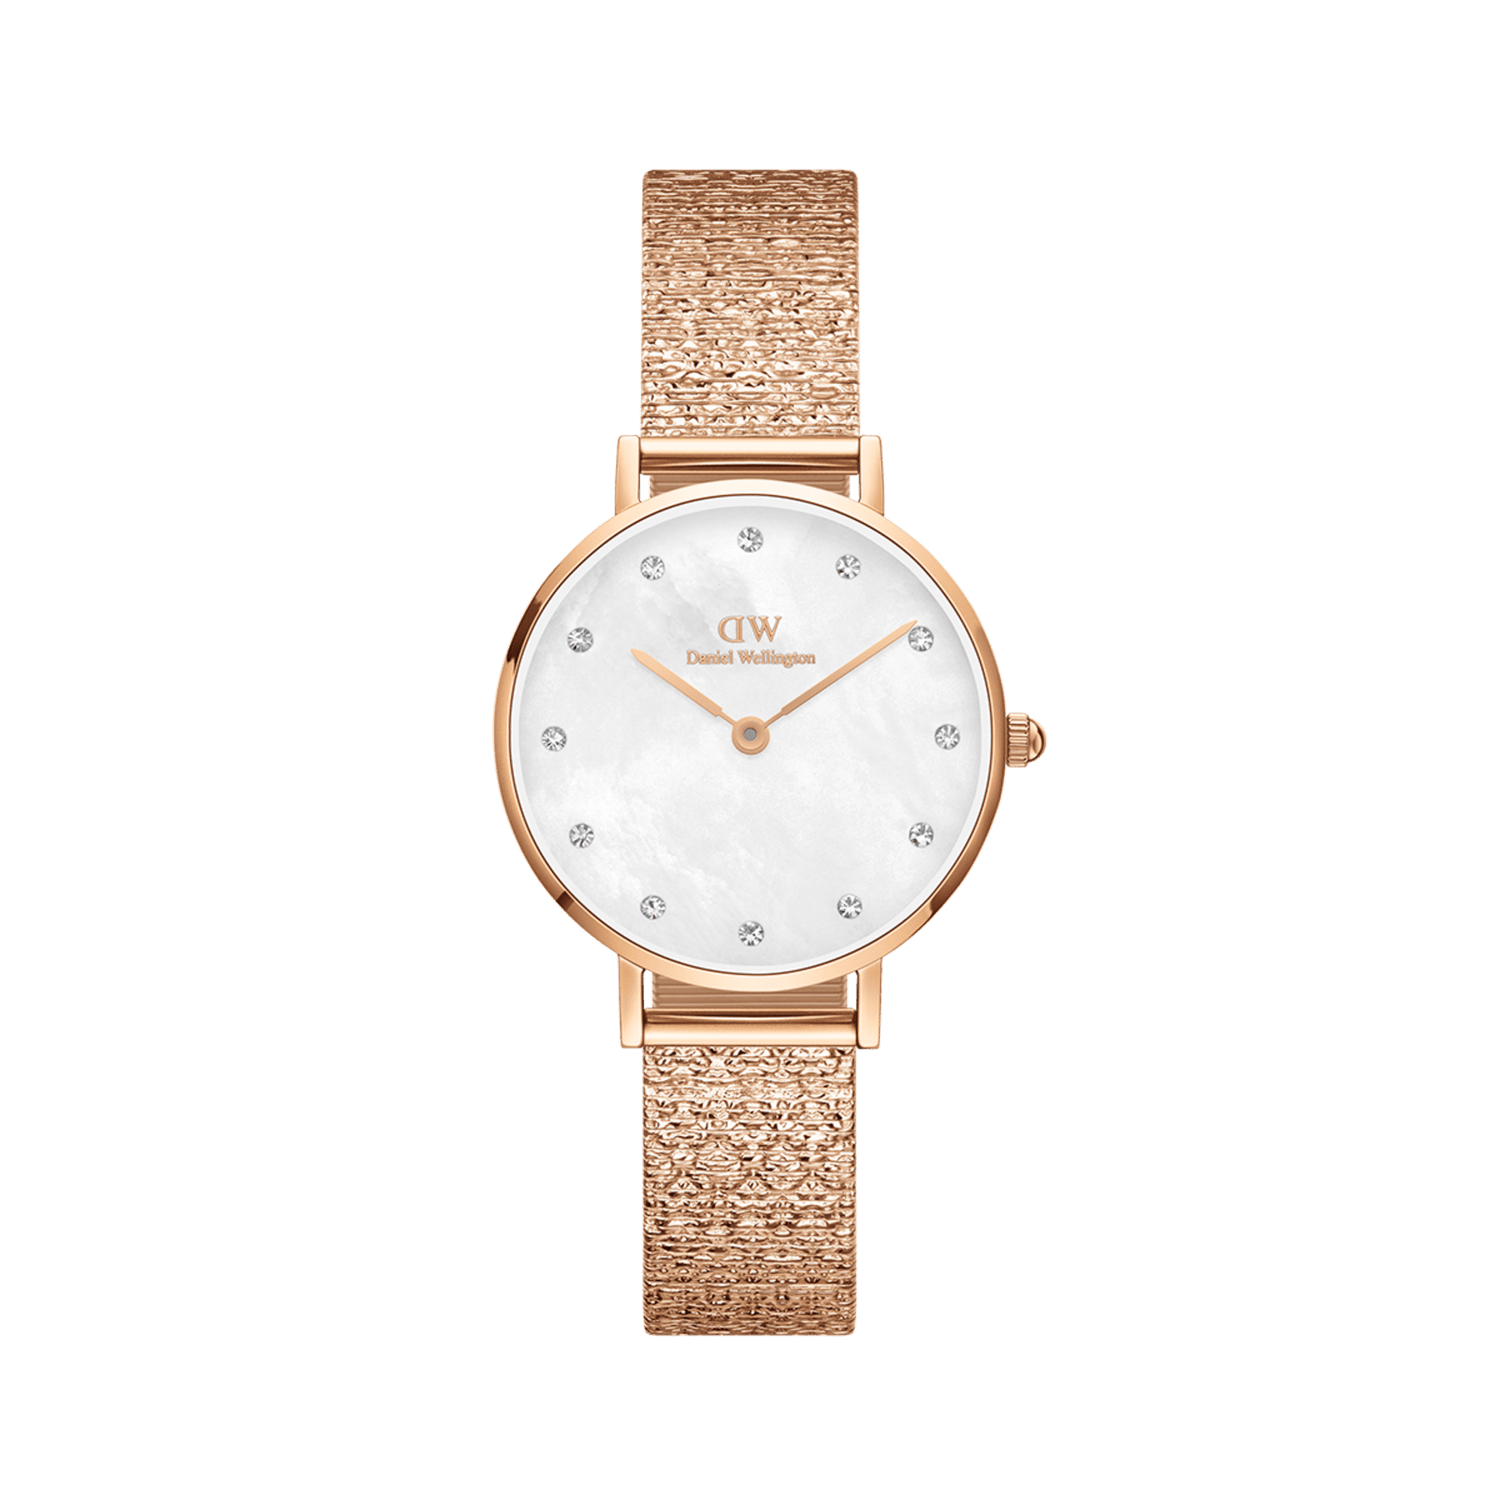 Durham - Men's rose gold watch with white dial 40 mm | DW